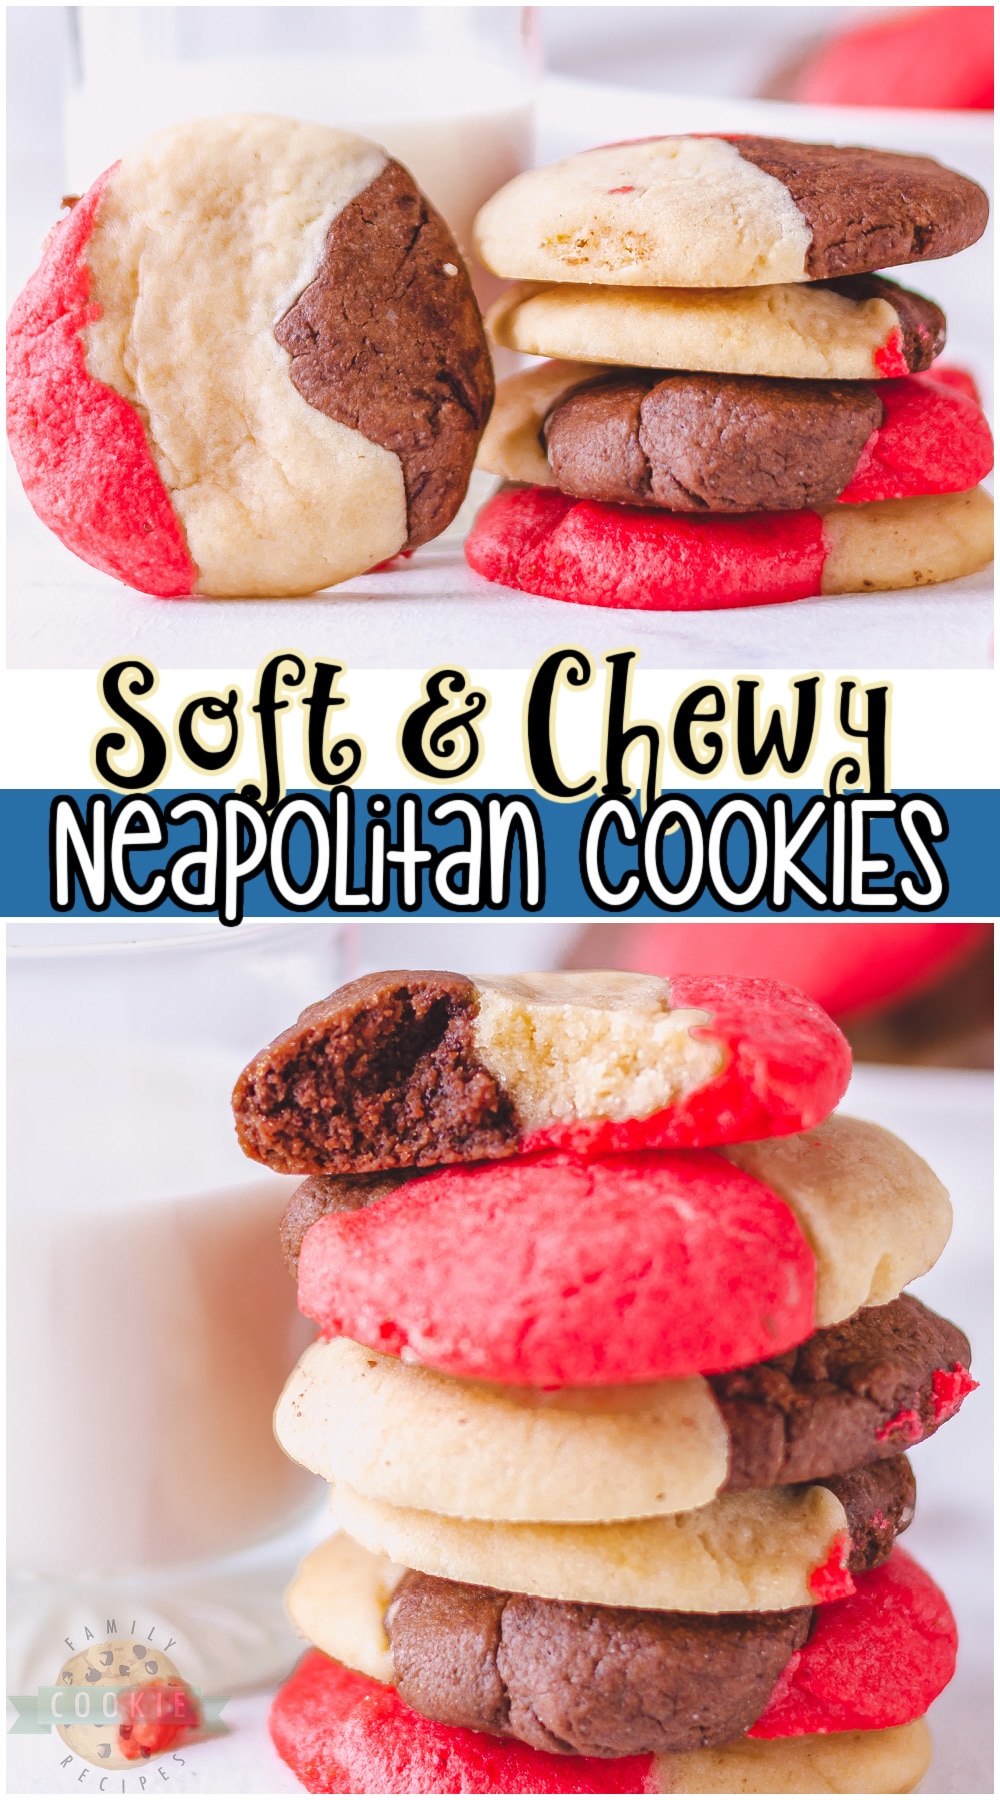 Neapolitan cookies are soft & chewy cookies that combine strawberry, chocolate & vanilla flavors! Just like the classic ice cream flavor, Neapolitan makes for a fun & tasty cookie recipe! 